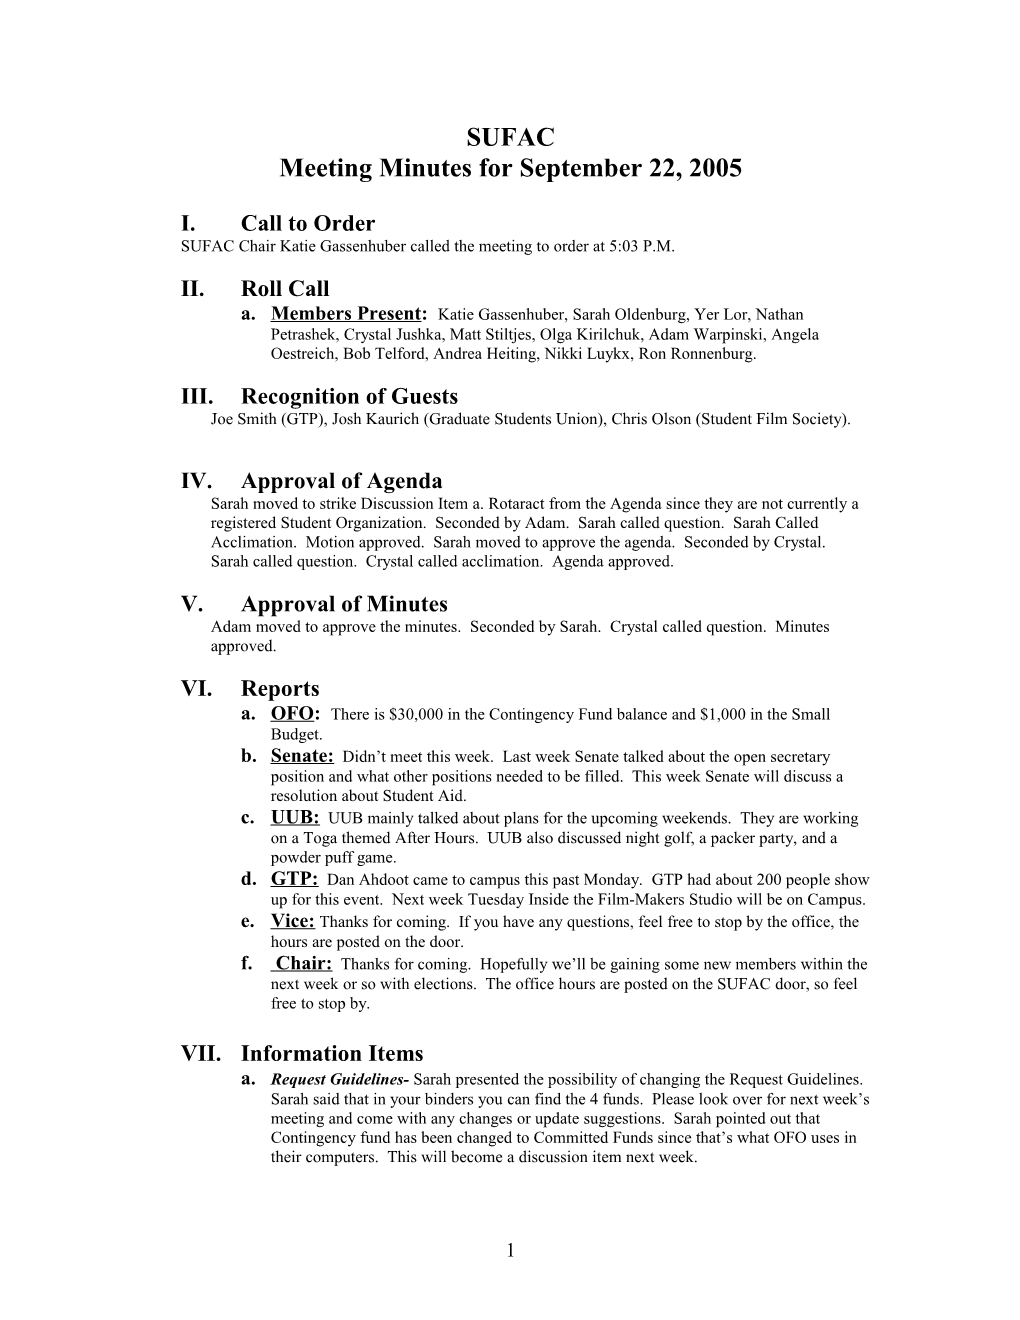 Meeting Minutes for September 22, 2005